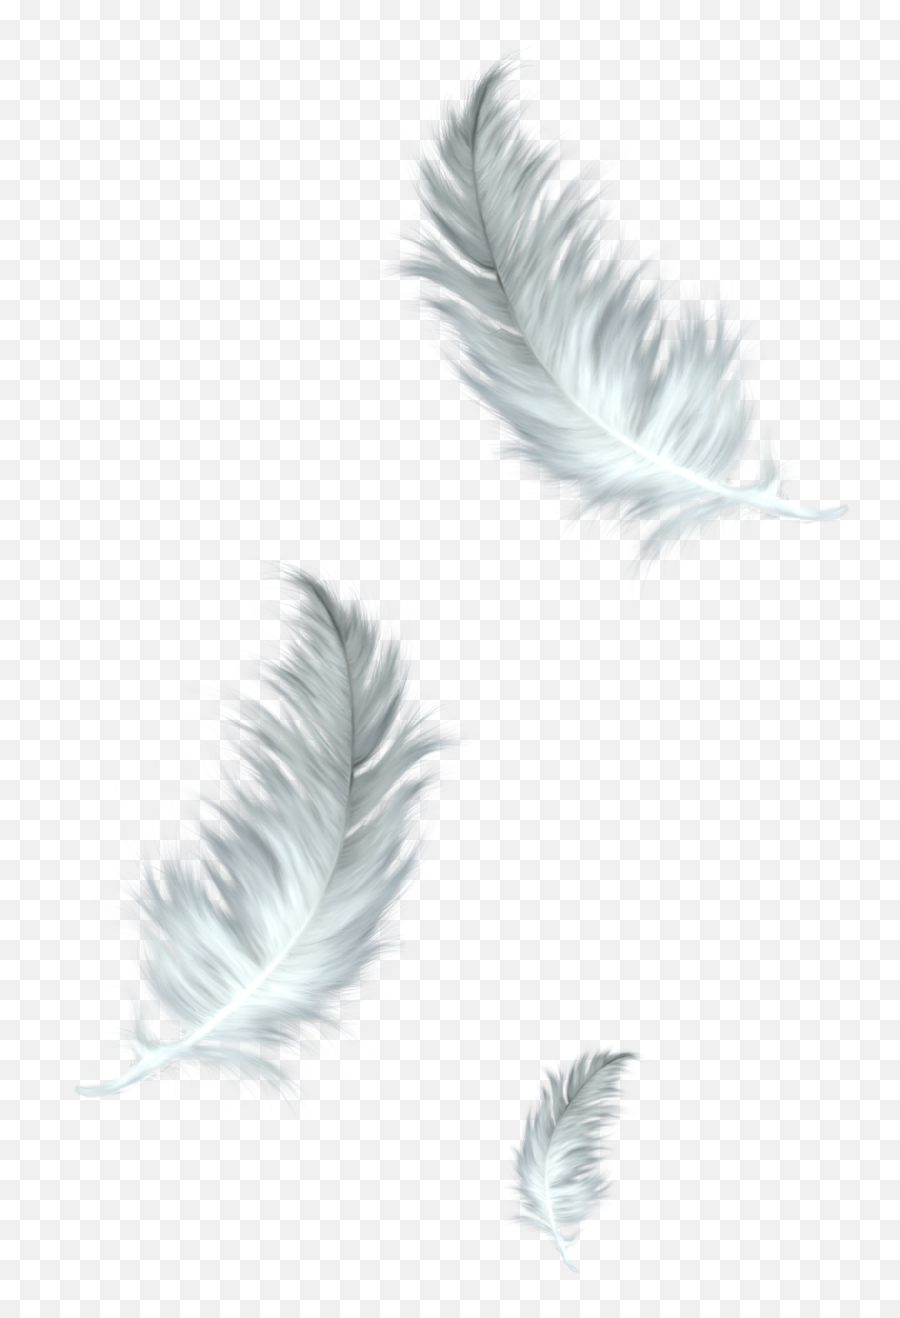 The Floating Feather Bird Clip Art - Feathers Png Download Feathers Png,Feathers Png